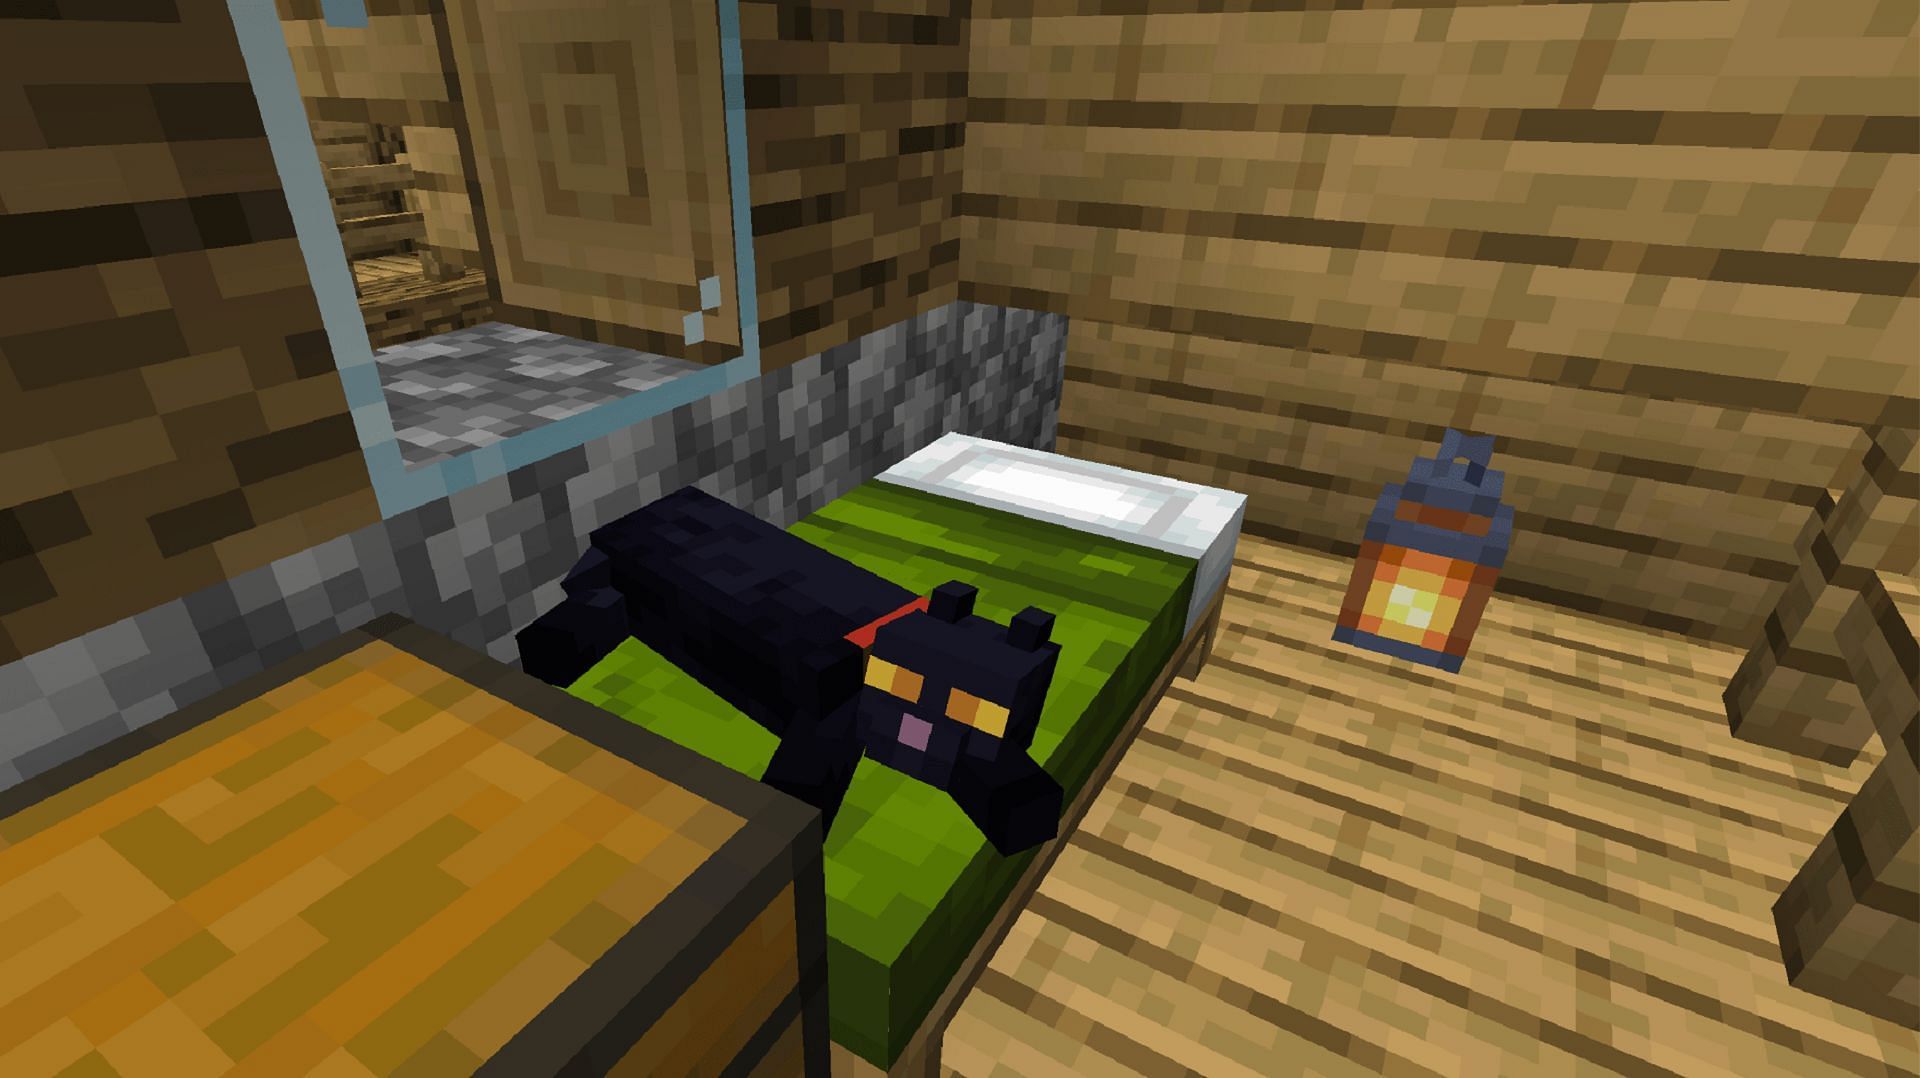 Tamed cats can do much more than take naps in Minecraft (Image via Mojang)